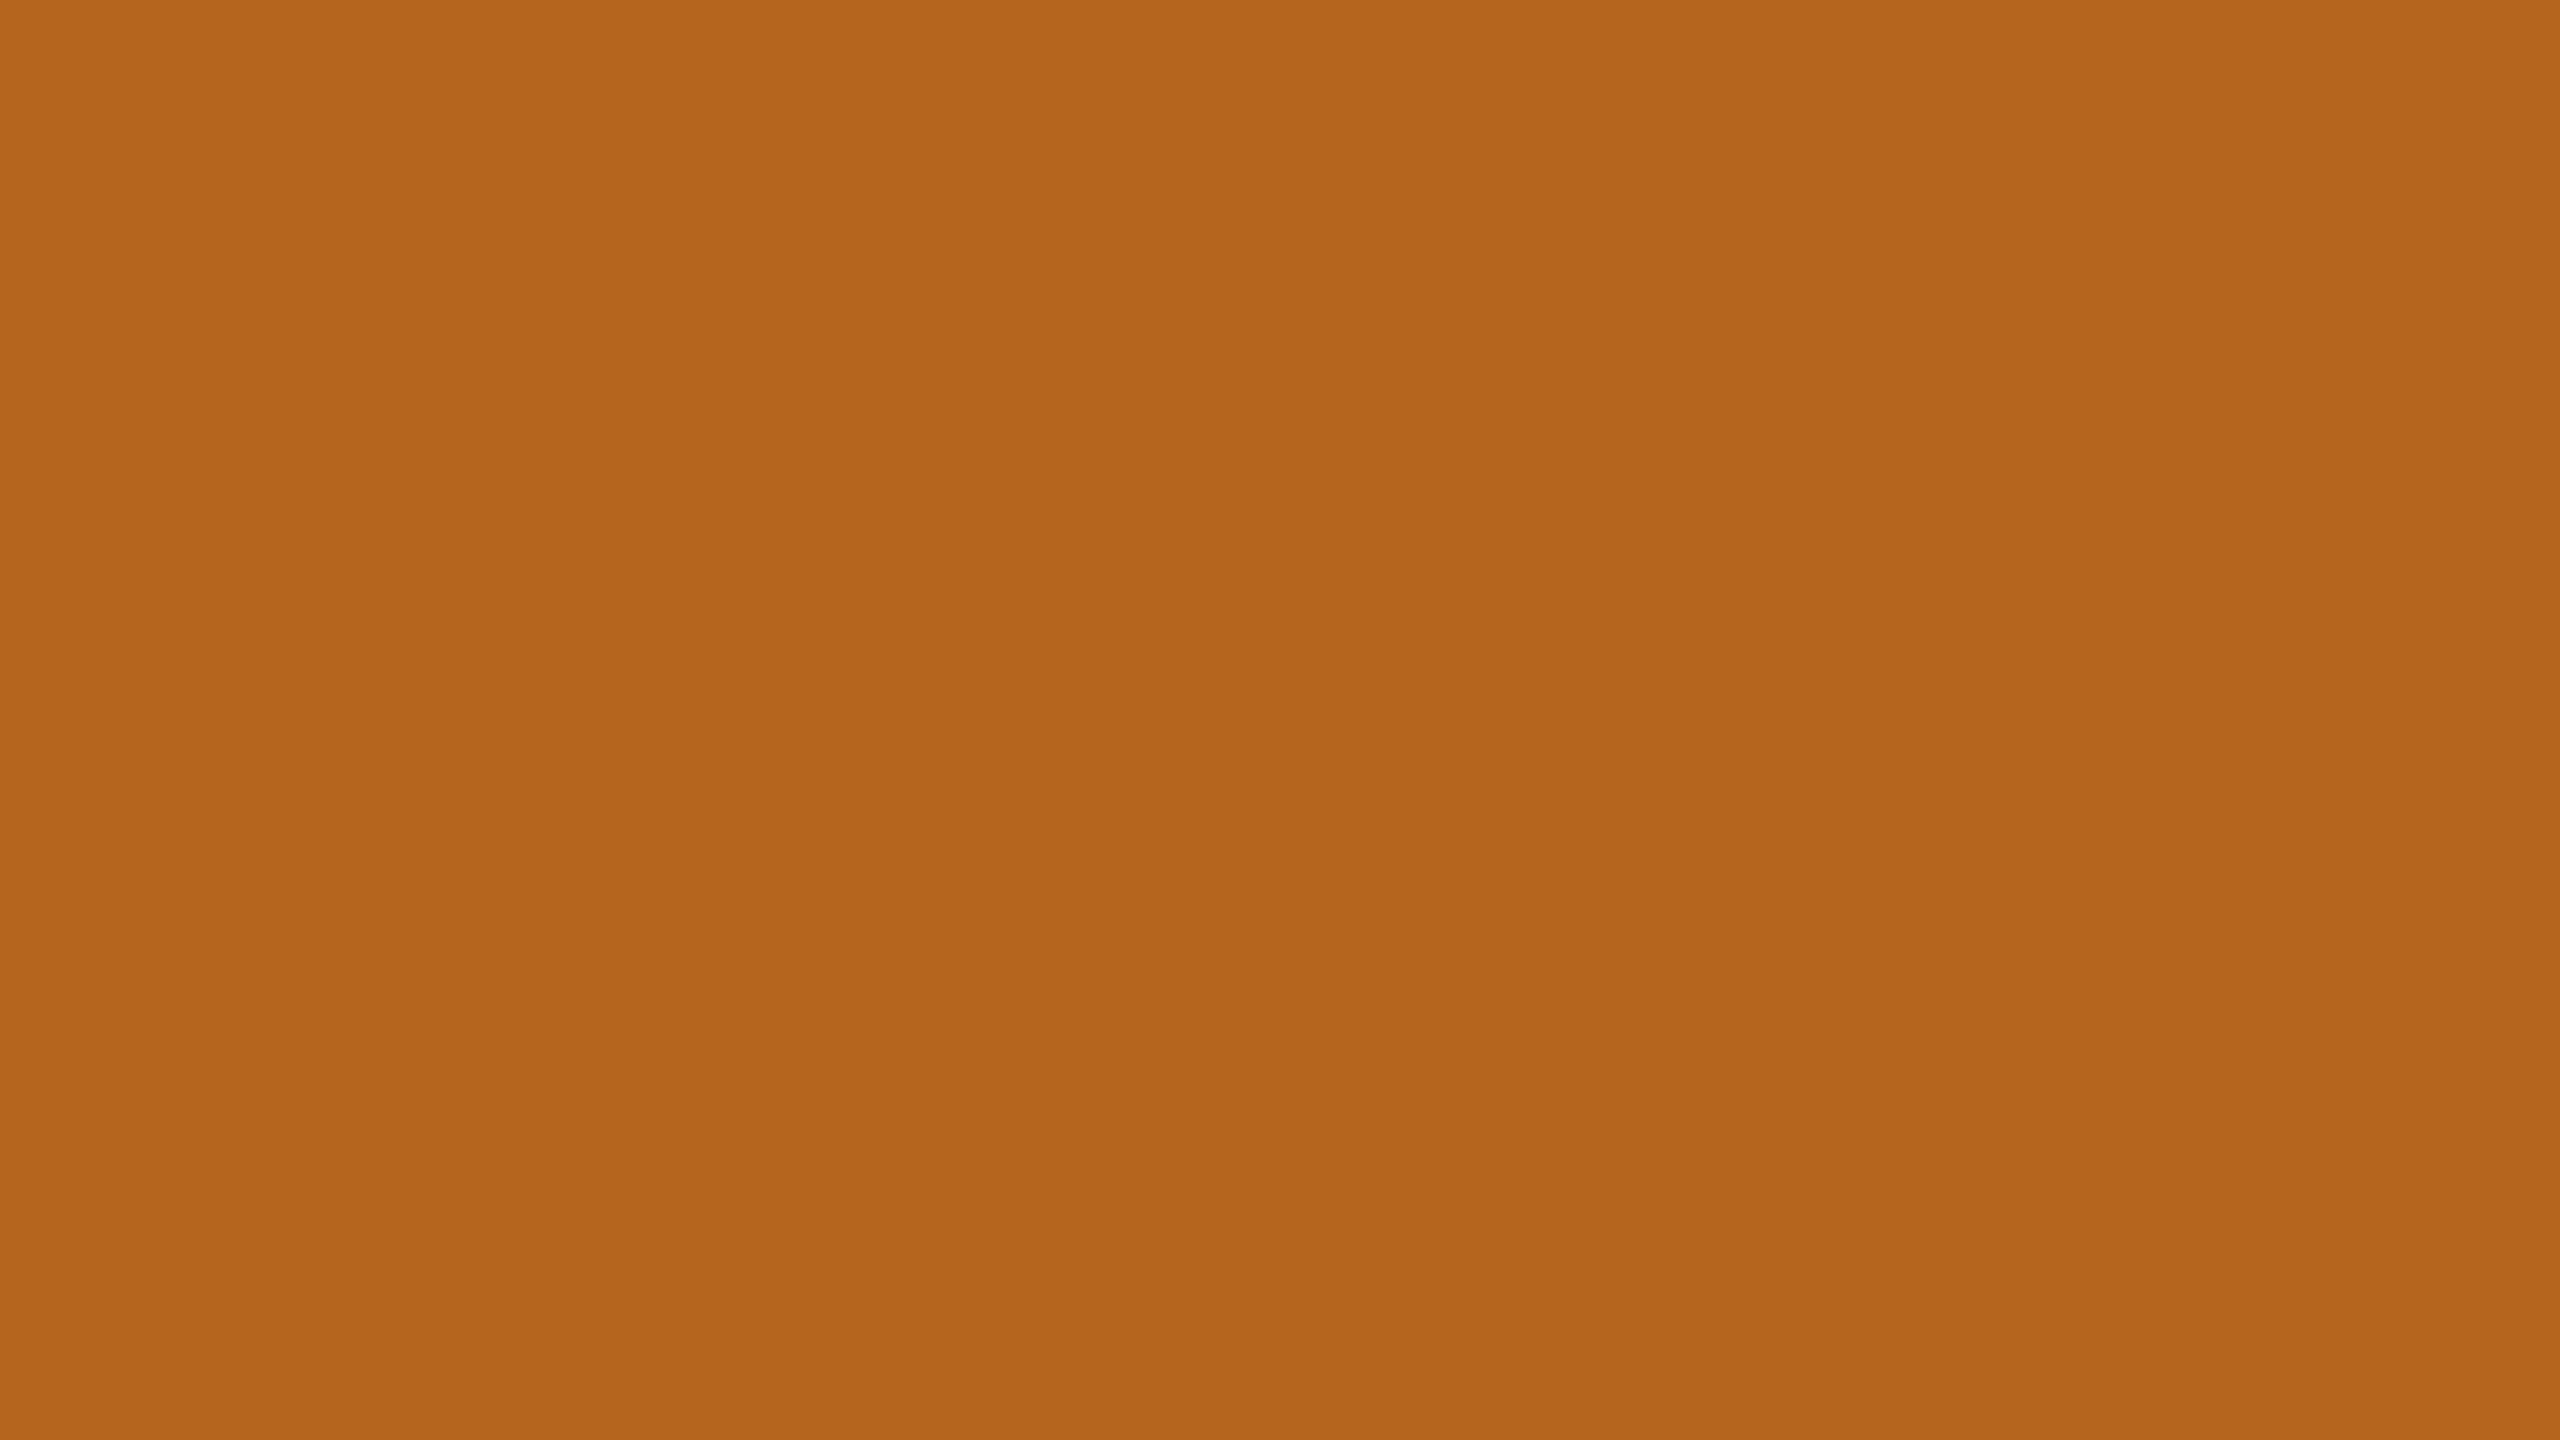 2560x1440 Light Brown Solid Color Background